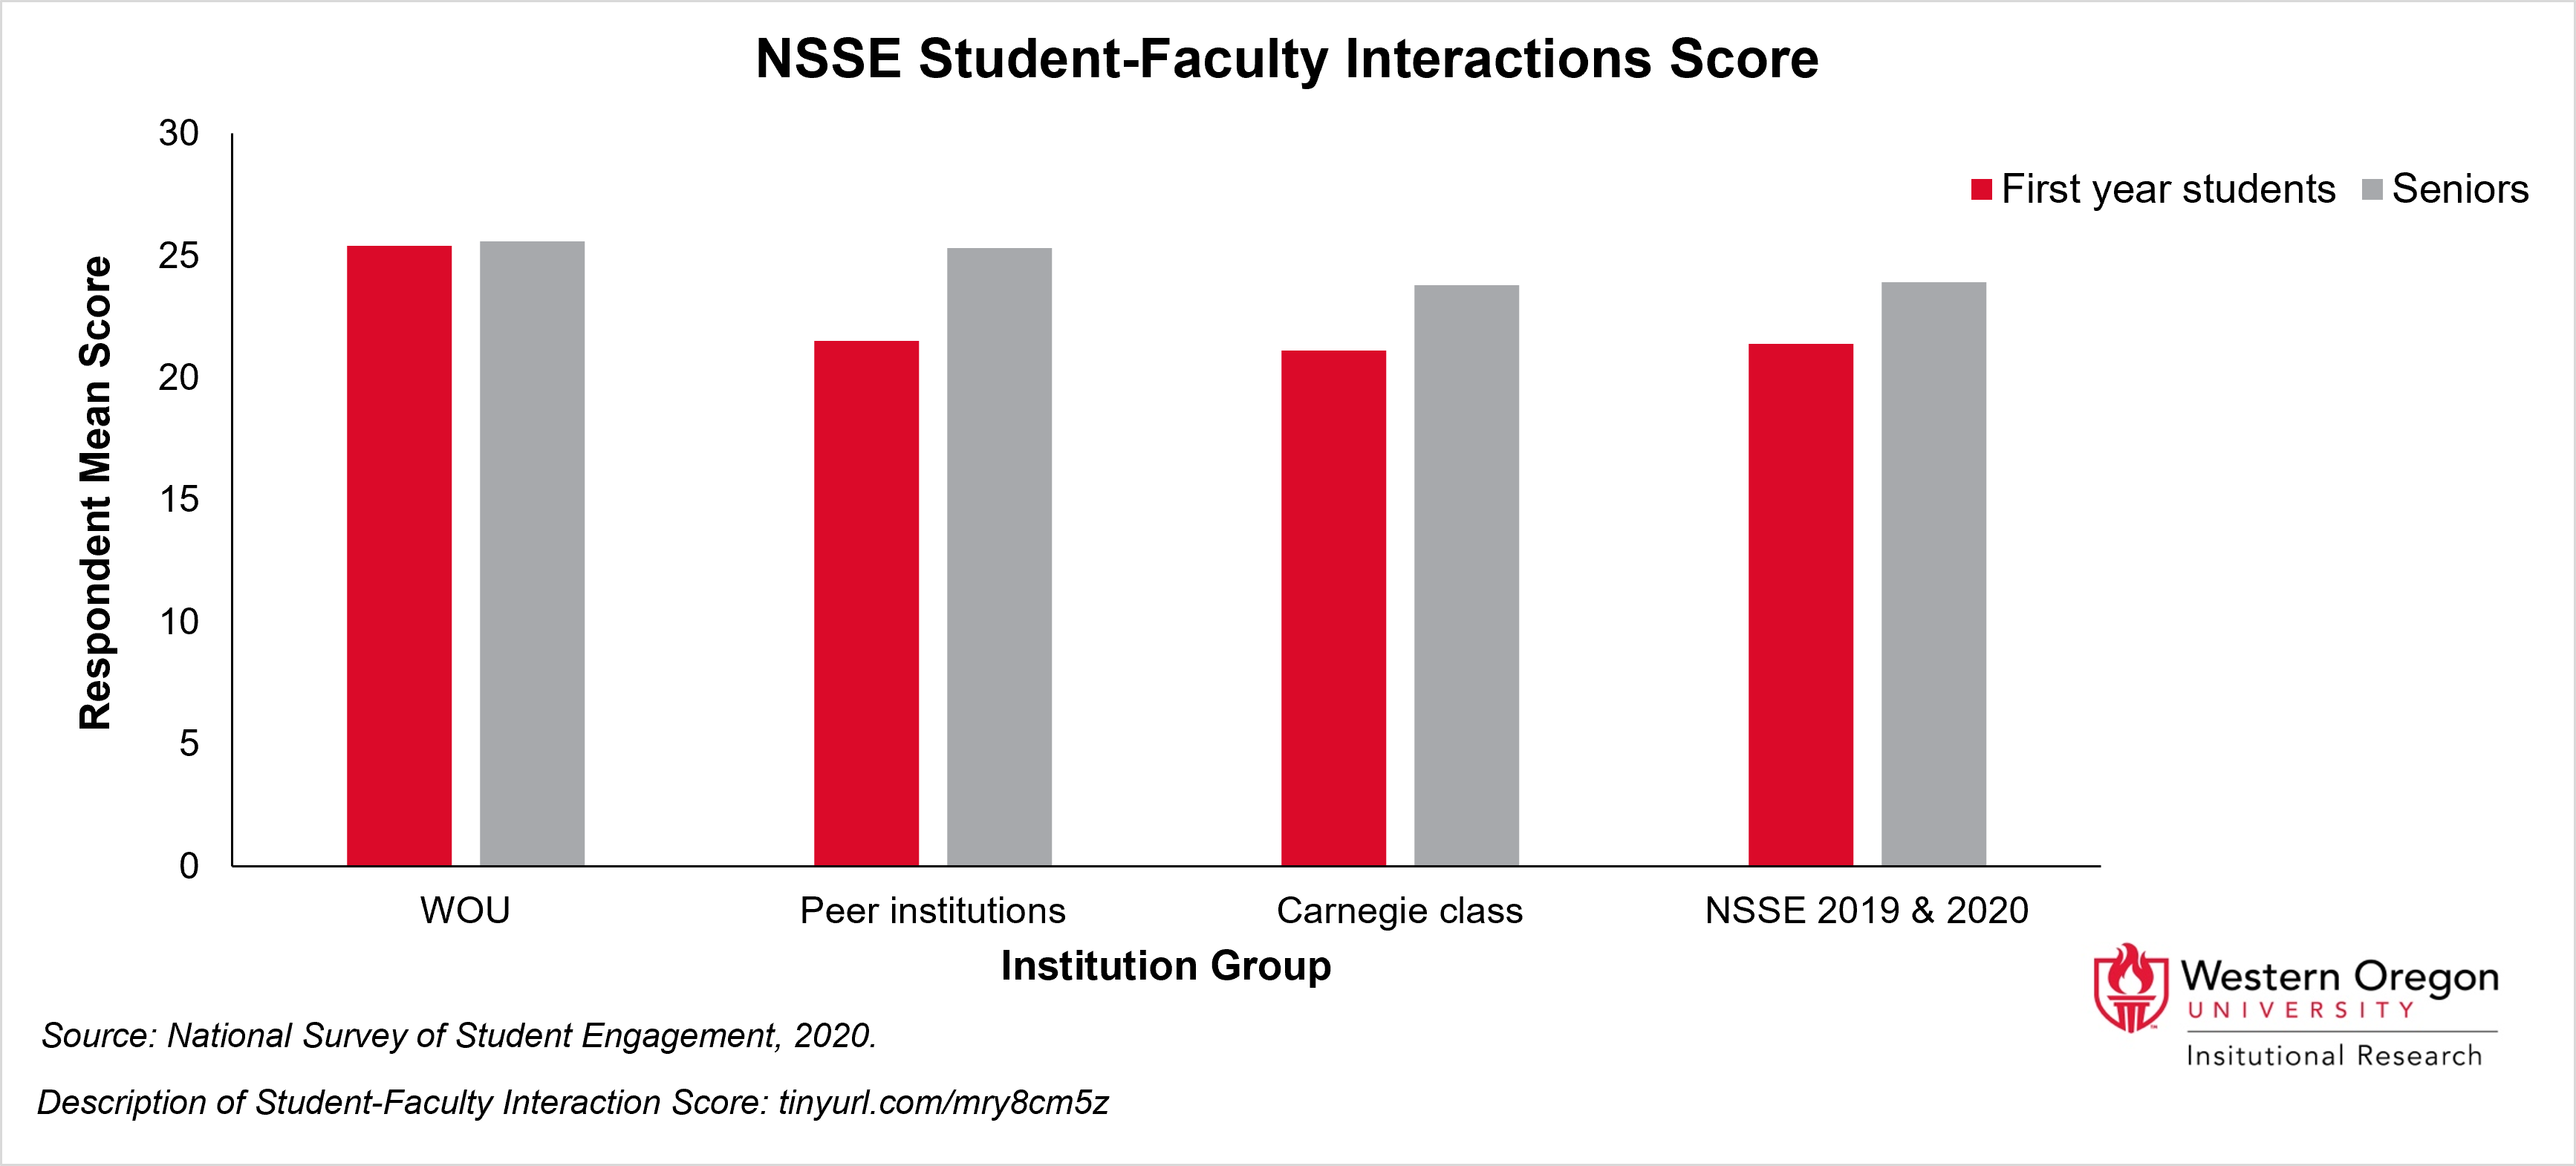 Bar chart comparing respondent mean NSSE score of student-faculty interactions for first years and seniors between WOU, peer insitutions, carnegie class, and NSSE 2019 and 2020. WOU first years have higher mean scores than other groups. Description of score: tinyurl.com/mry8cm5z